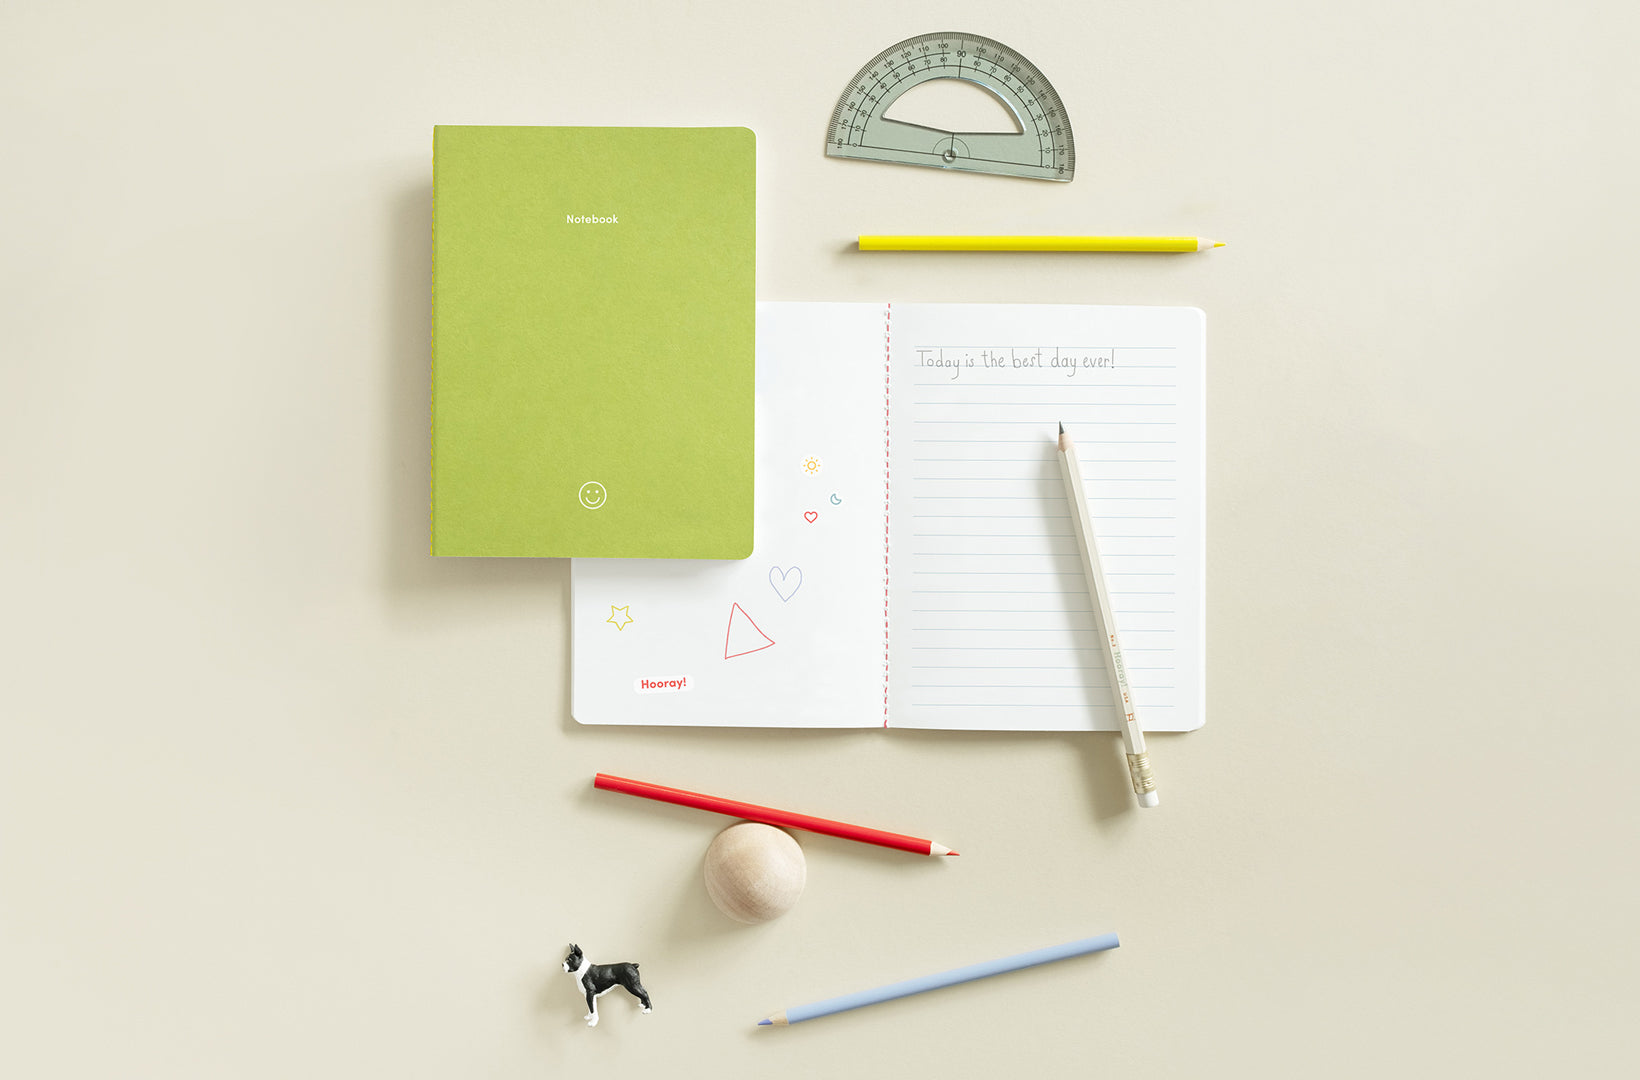 The Clover and Mist Notebook Set from the Appointed Kids collection sit against a light beige background. The mist notebook is open and laying flat with some doodles drawn. Colorful pencils, a protractor, and small animal toys lay aside.